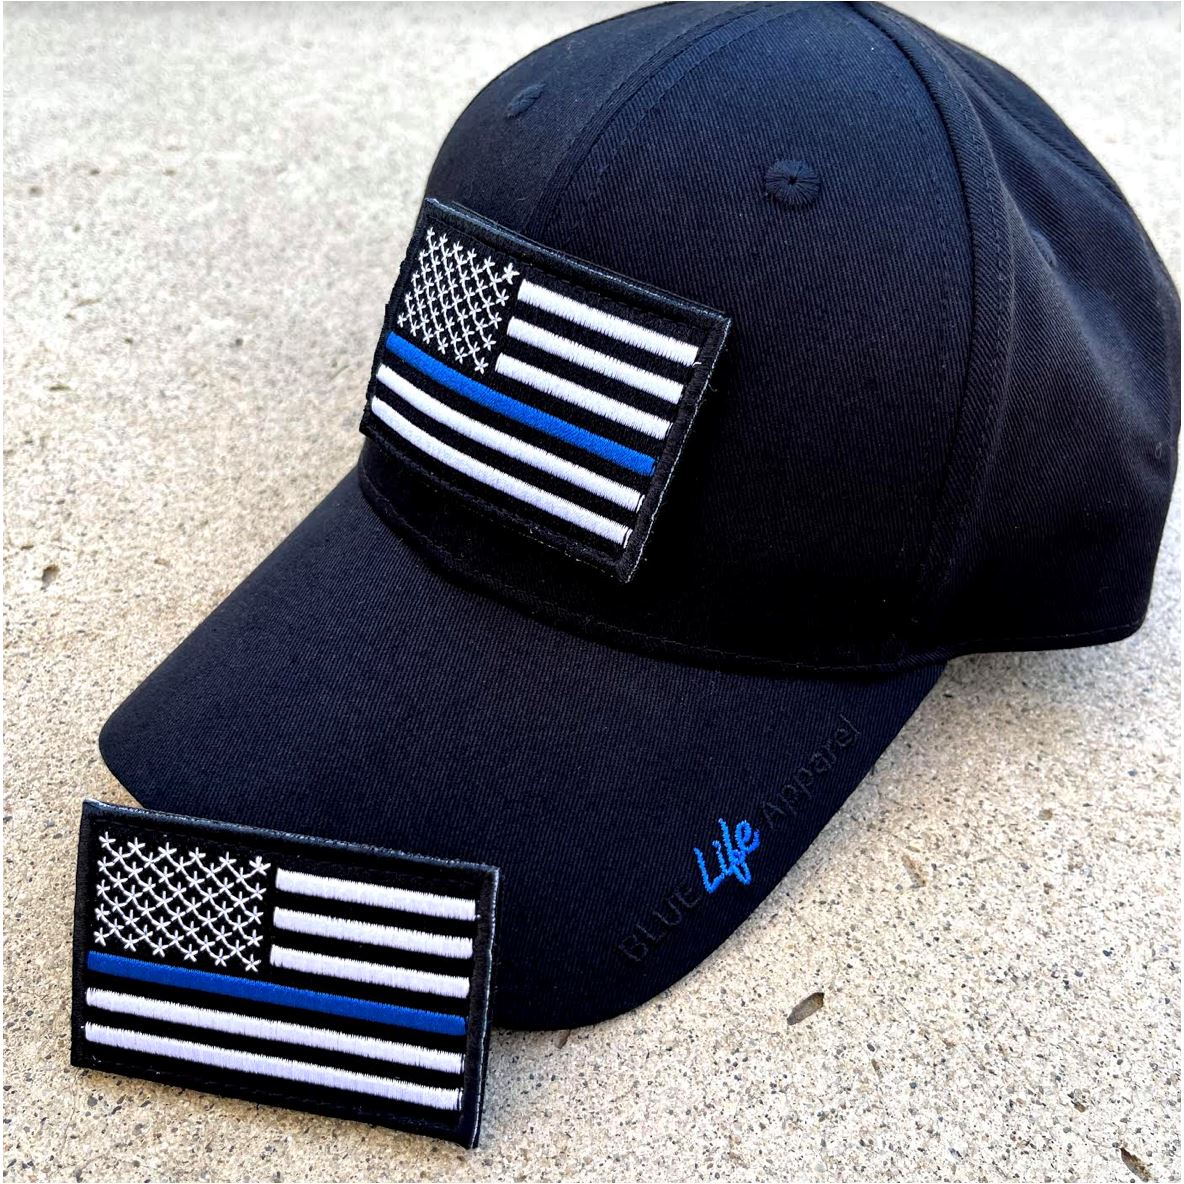 Black Operator's Hat with Thin Blue Line Patch Hats Blue Life Apparel Hat with Thin Blue Line Flag Patch 